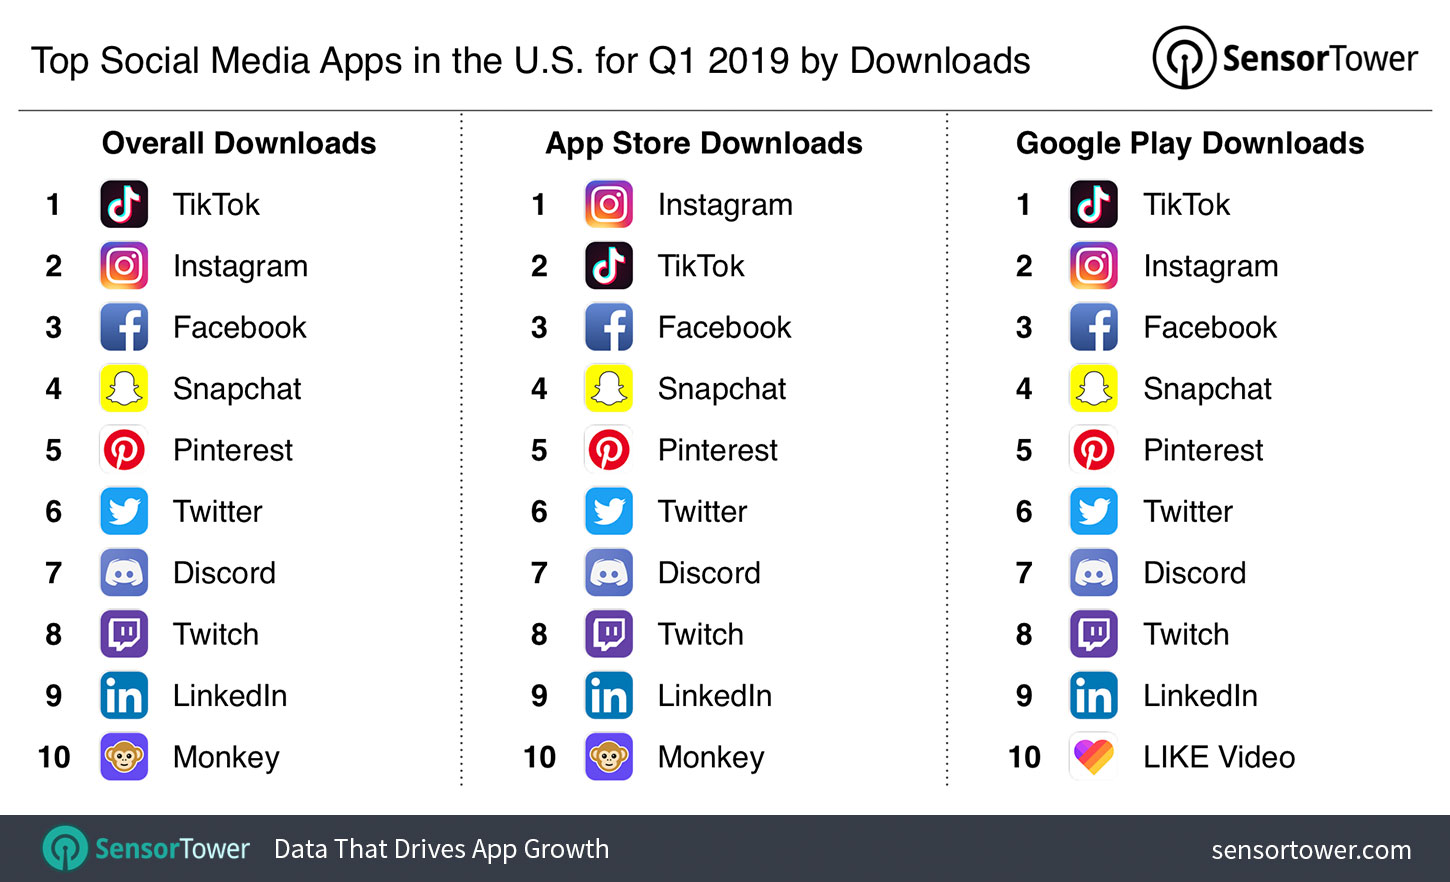 Top Social Media Apps in the U.S. for Q1 2019 by Downloads